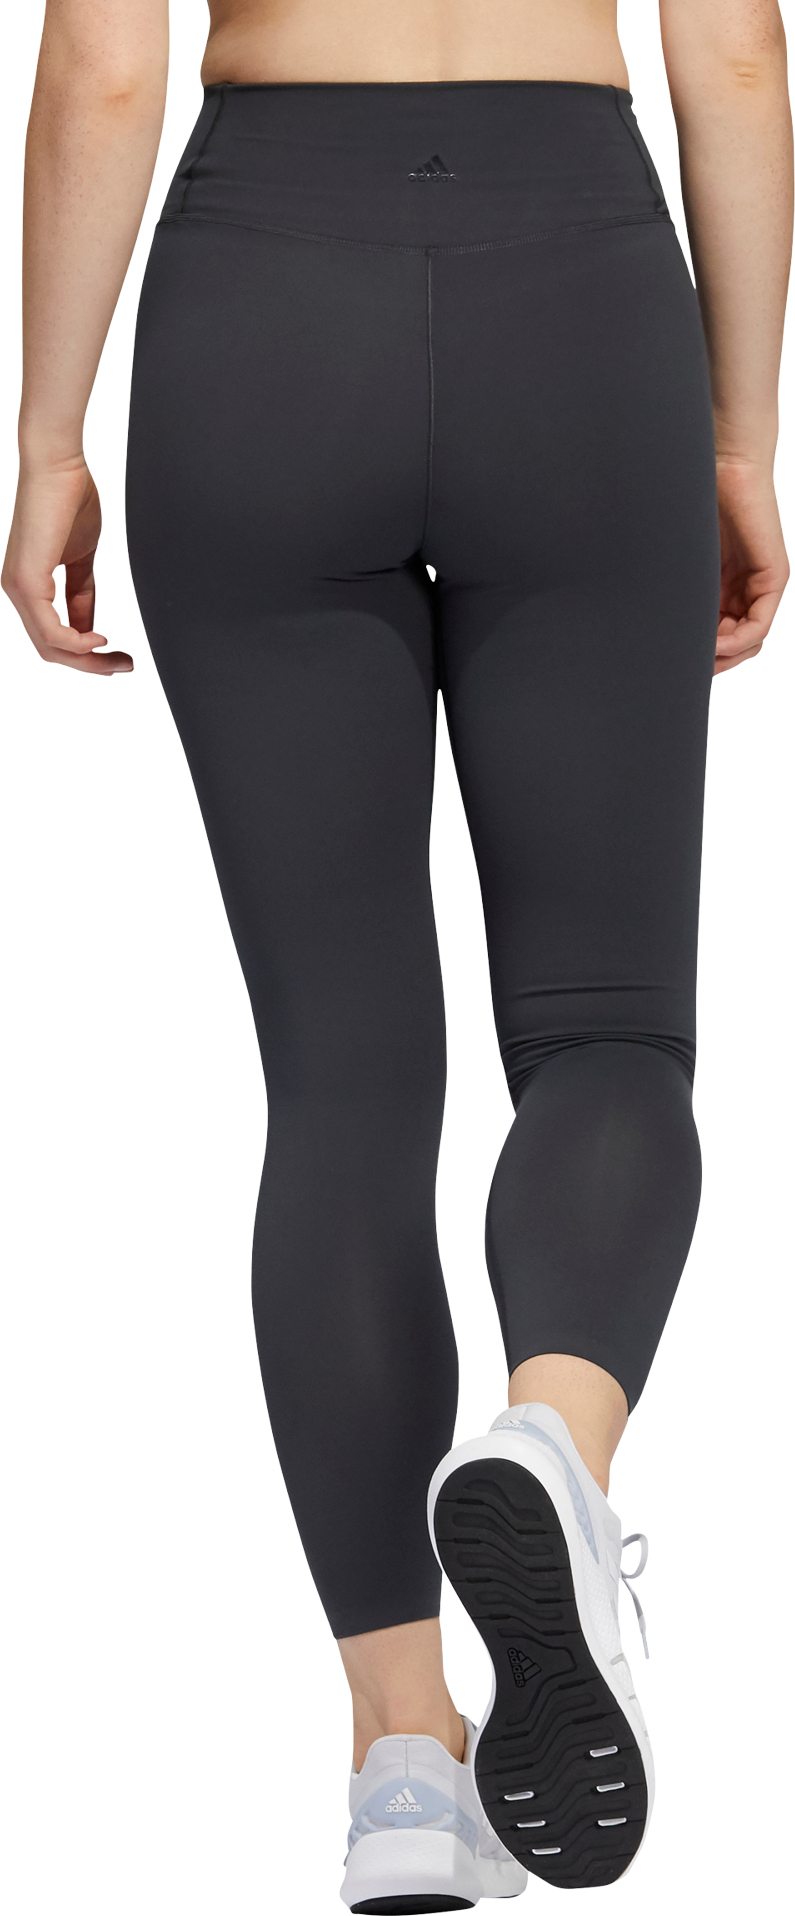 Women's Yoga Luxe Studio 7/8 Tight Chalky Brown, Buy Women's Yoga Luxe  Studio 7/8 Tight Chalky Brown here